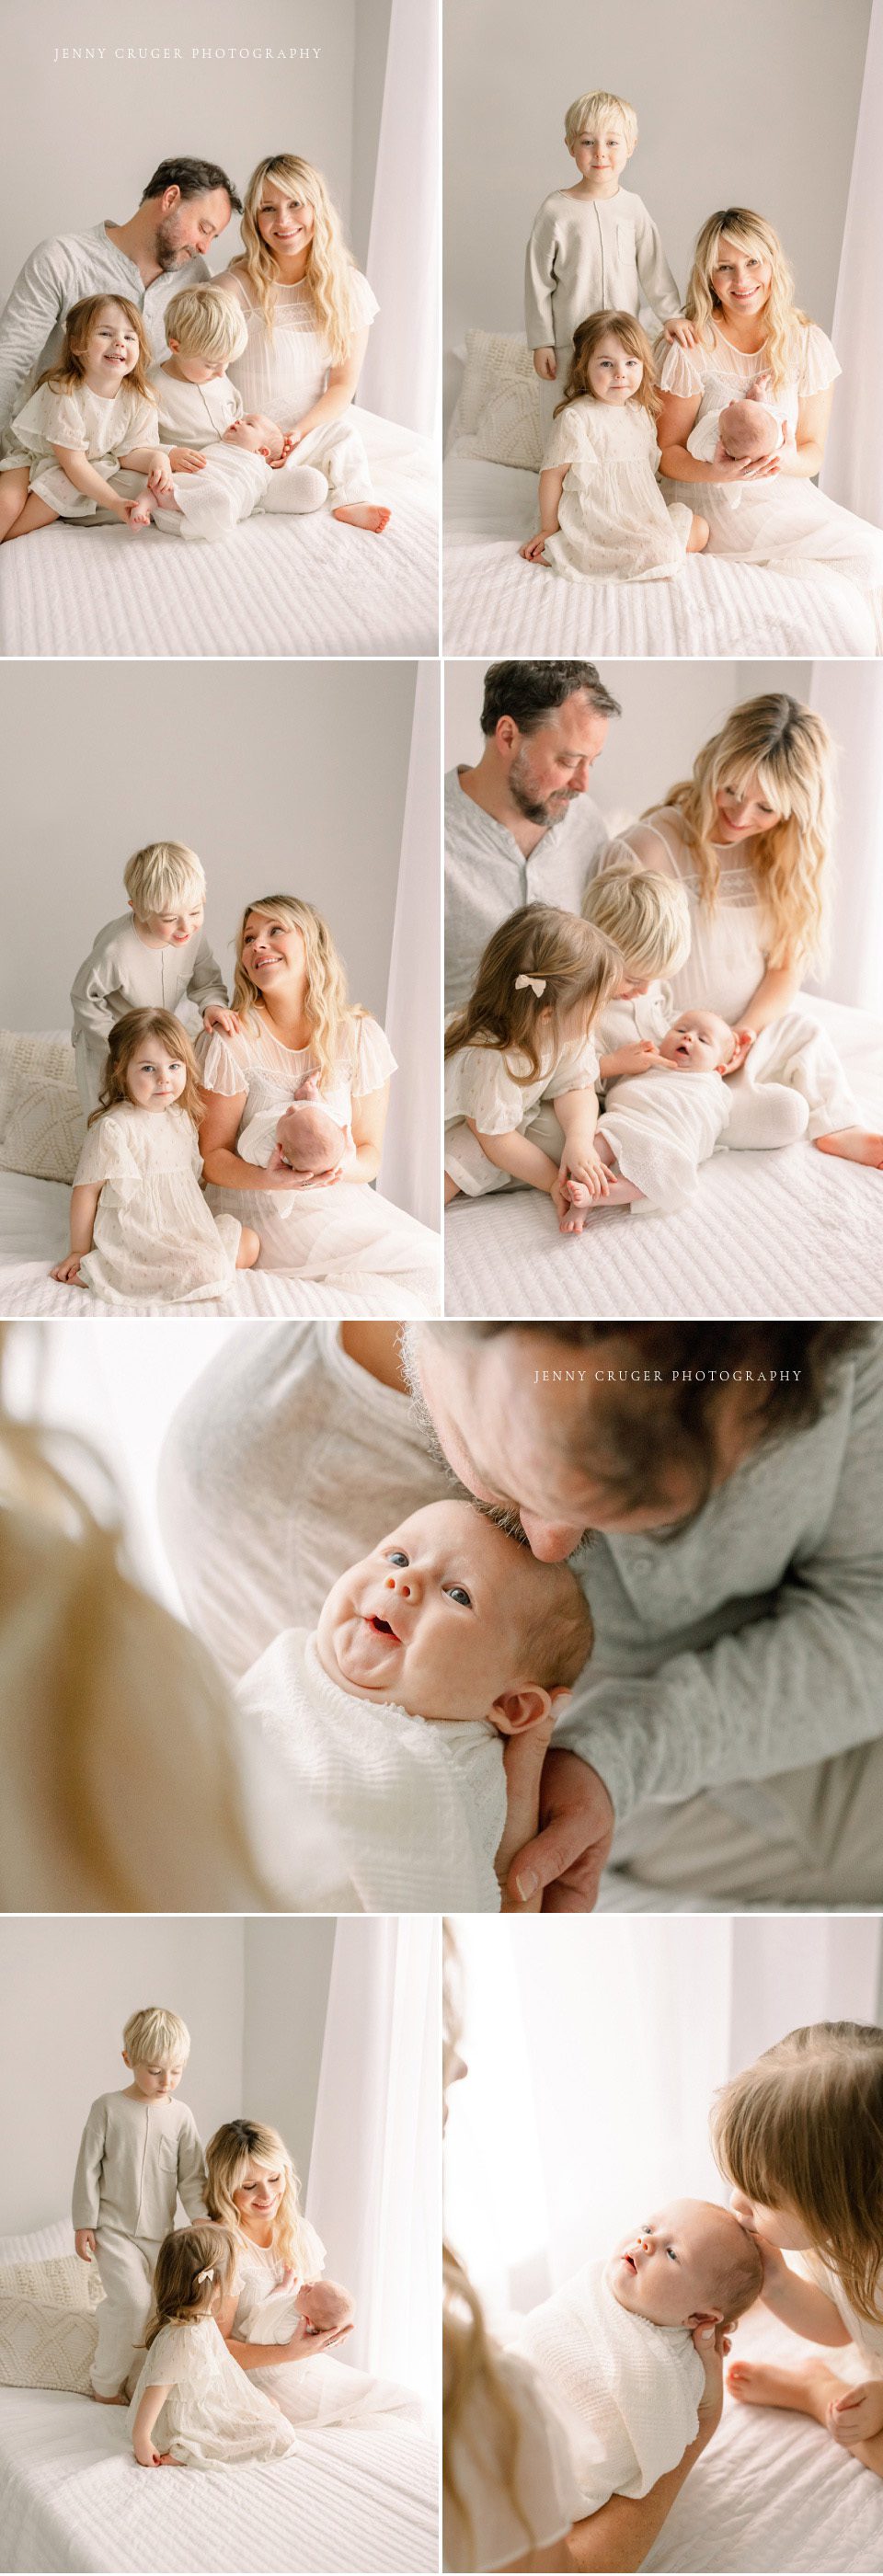 family newborn session with siblings in white studio